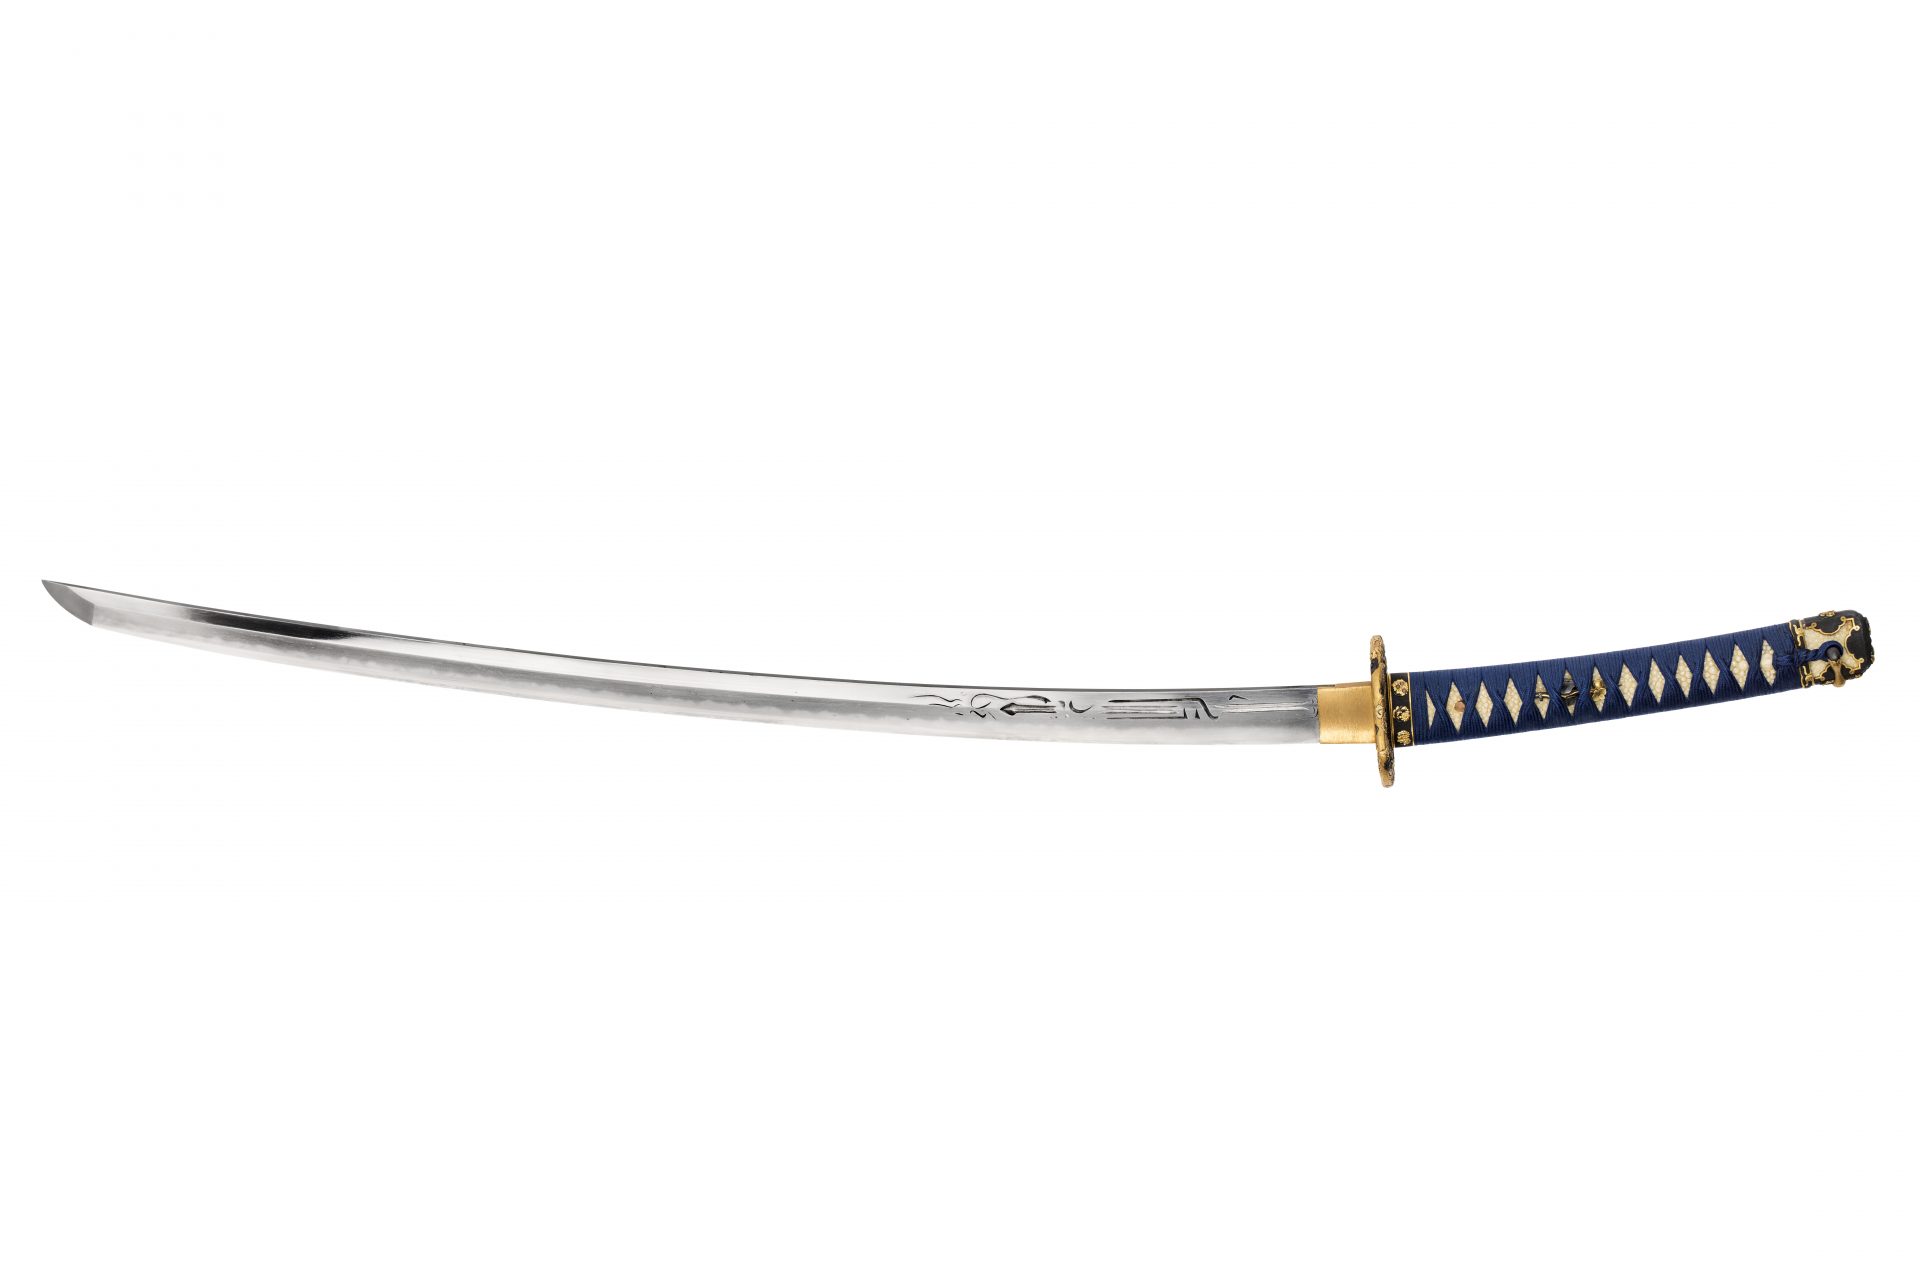 A long sword with a blue handle.